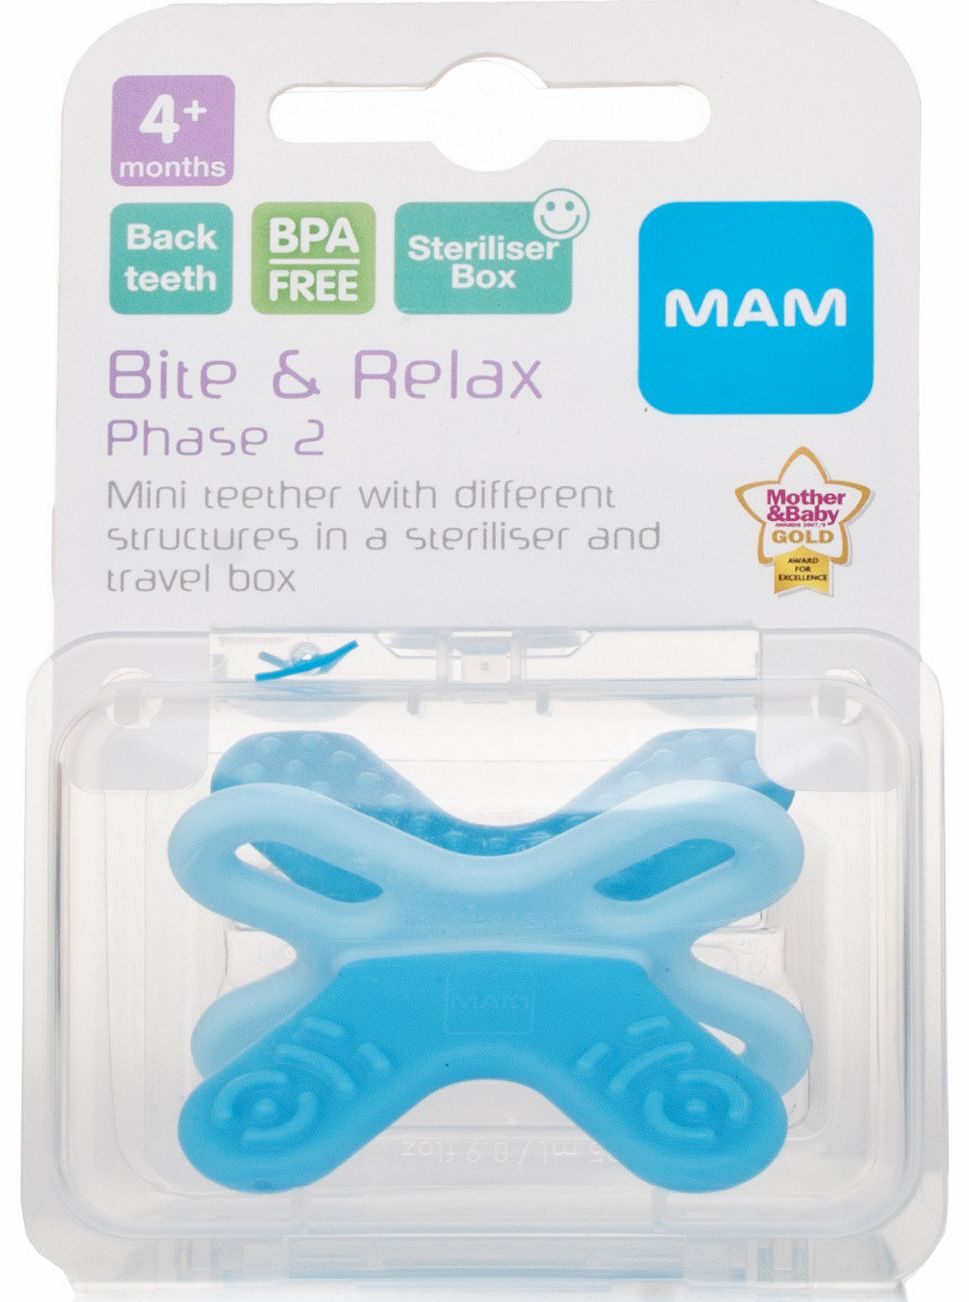 Bite & Relax 4+month Teether Boys